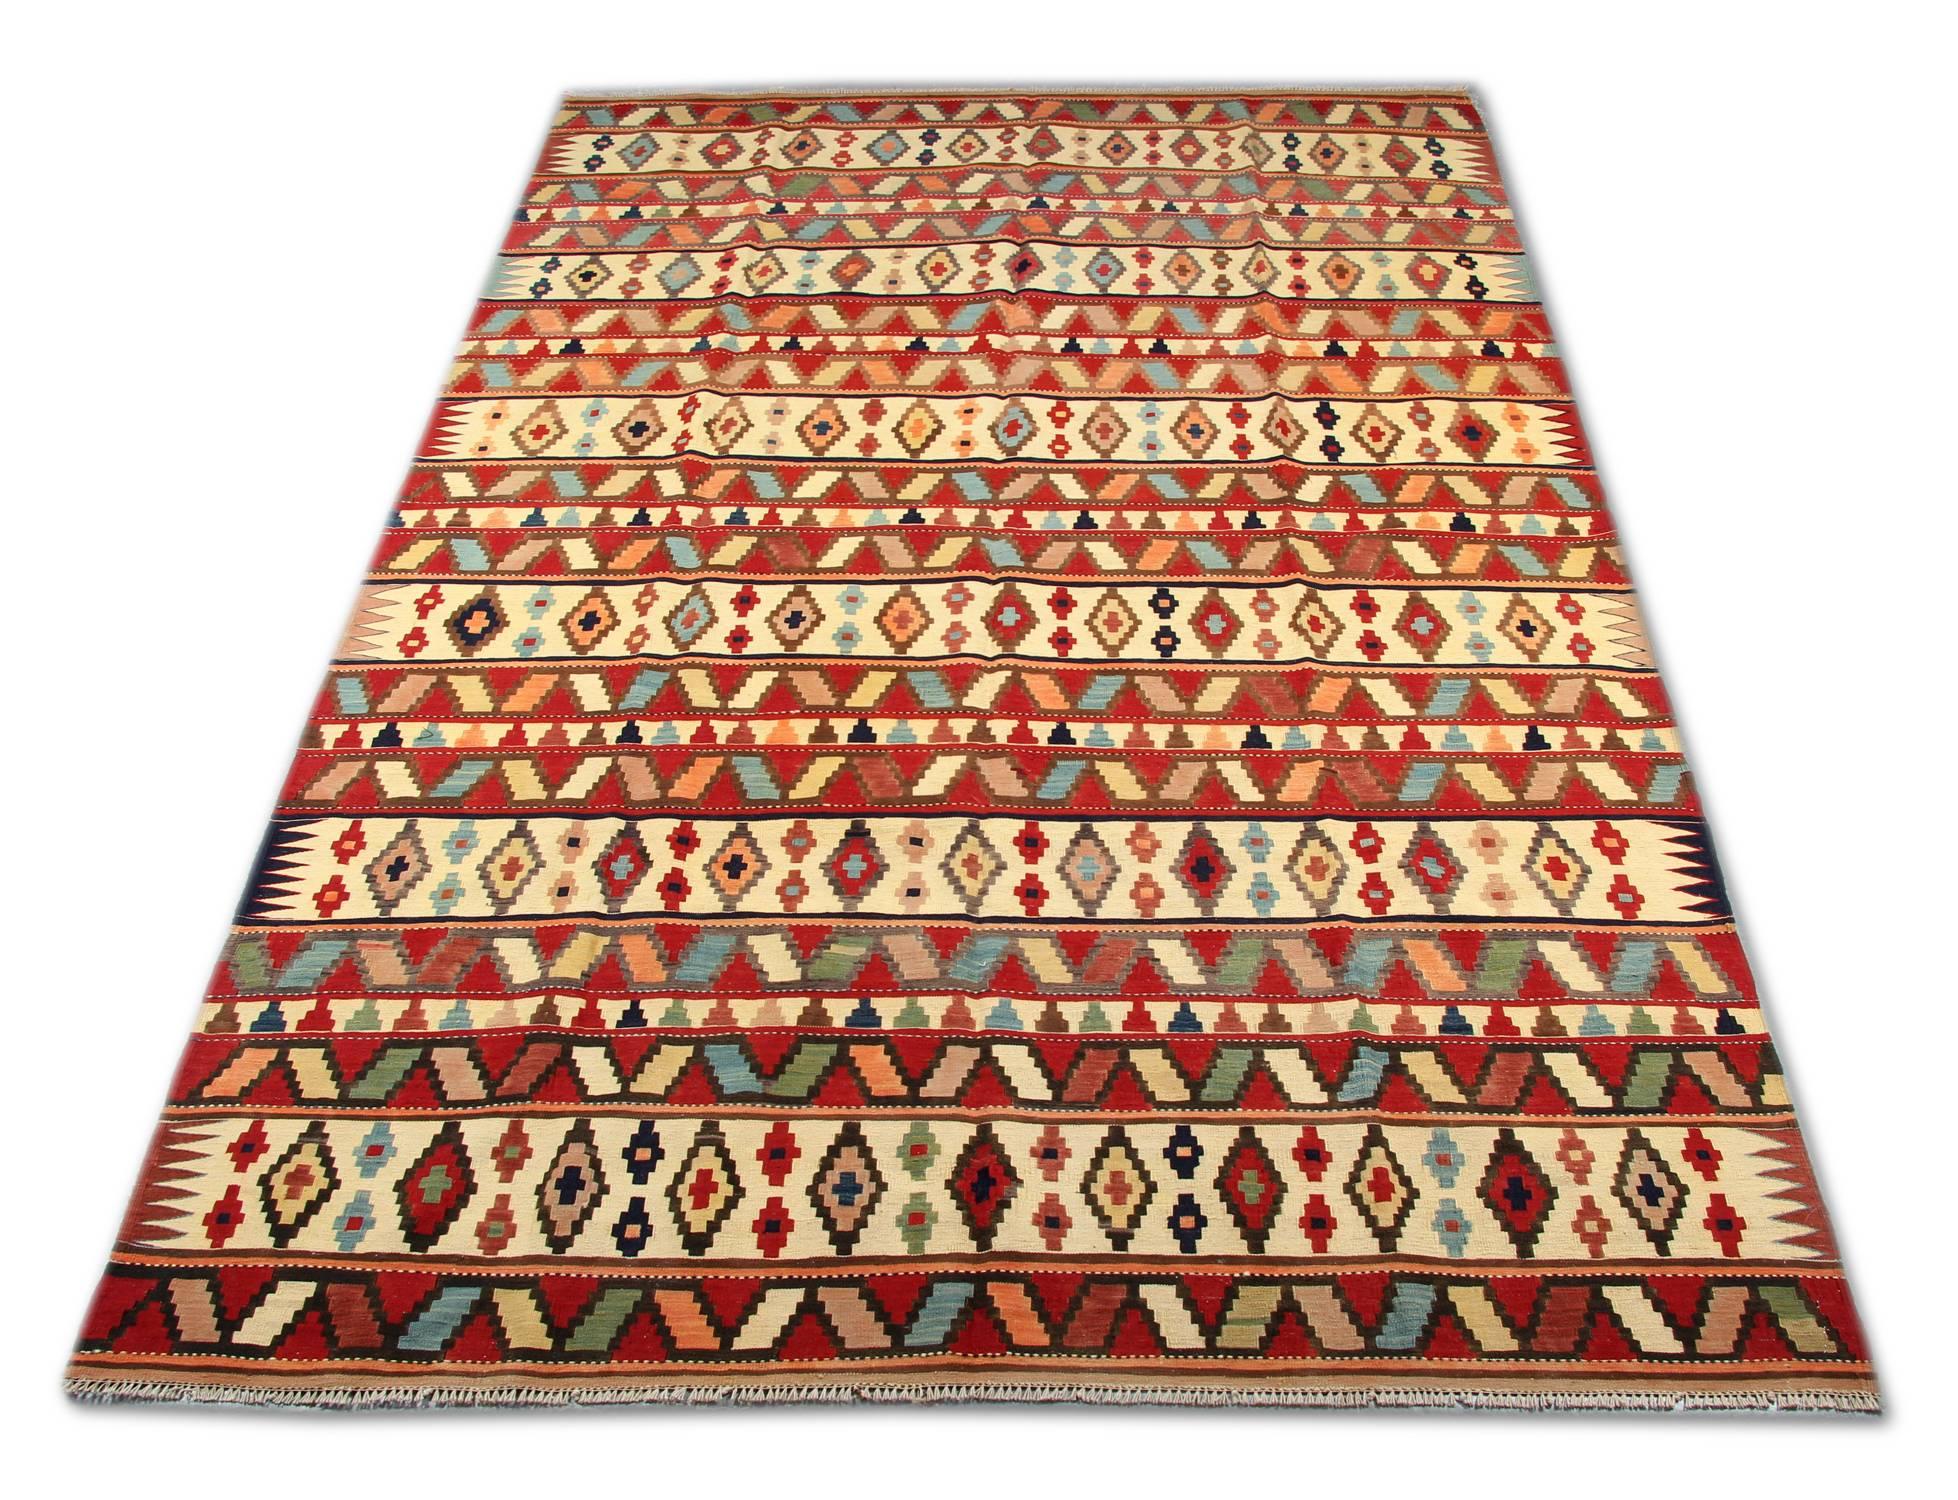 This handmade, colourful Caucasian carpet oriental rug is woven by skilled weavers in Azerbaijan, who used the highest quality wool and cotton. The flat-weave rug has ivory, orange Salmon, green, white, pink, black and brown colours. The striped rug